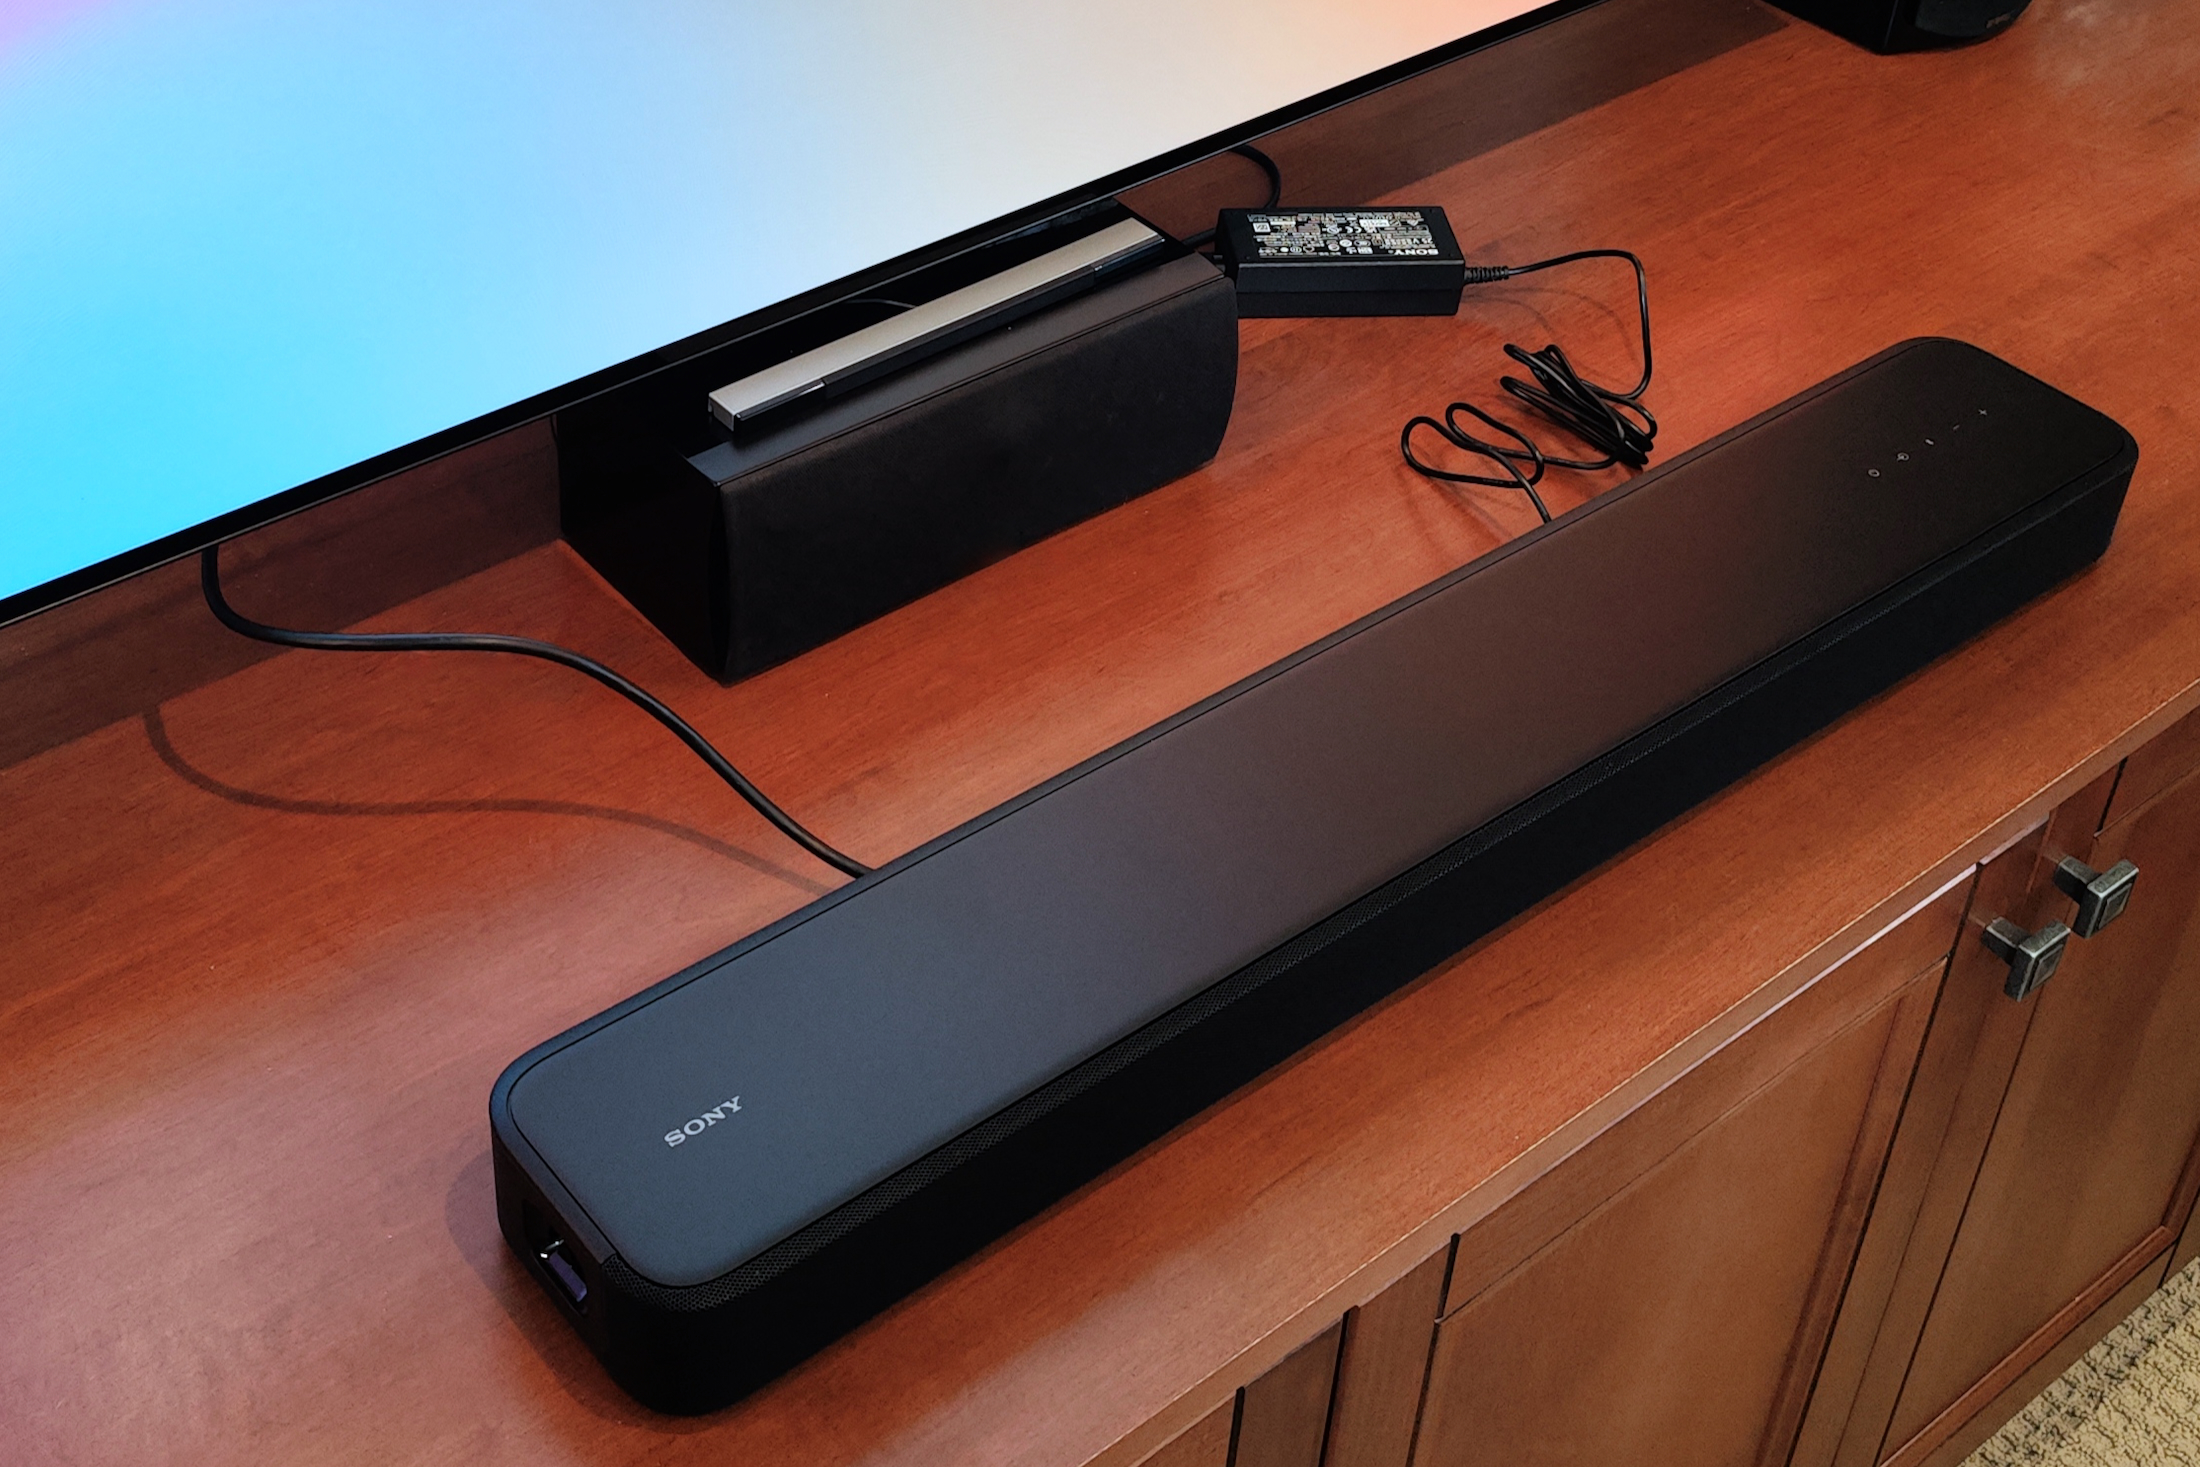 Sony HT-S2000 review: Sony trades smarts for bigger sound